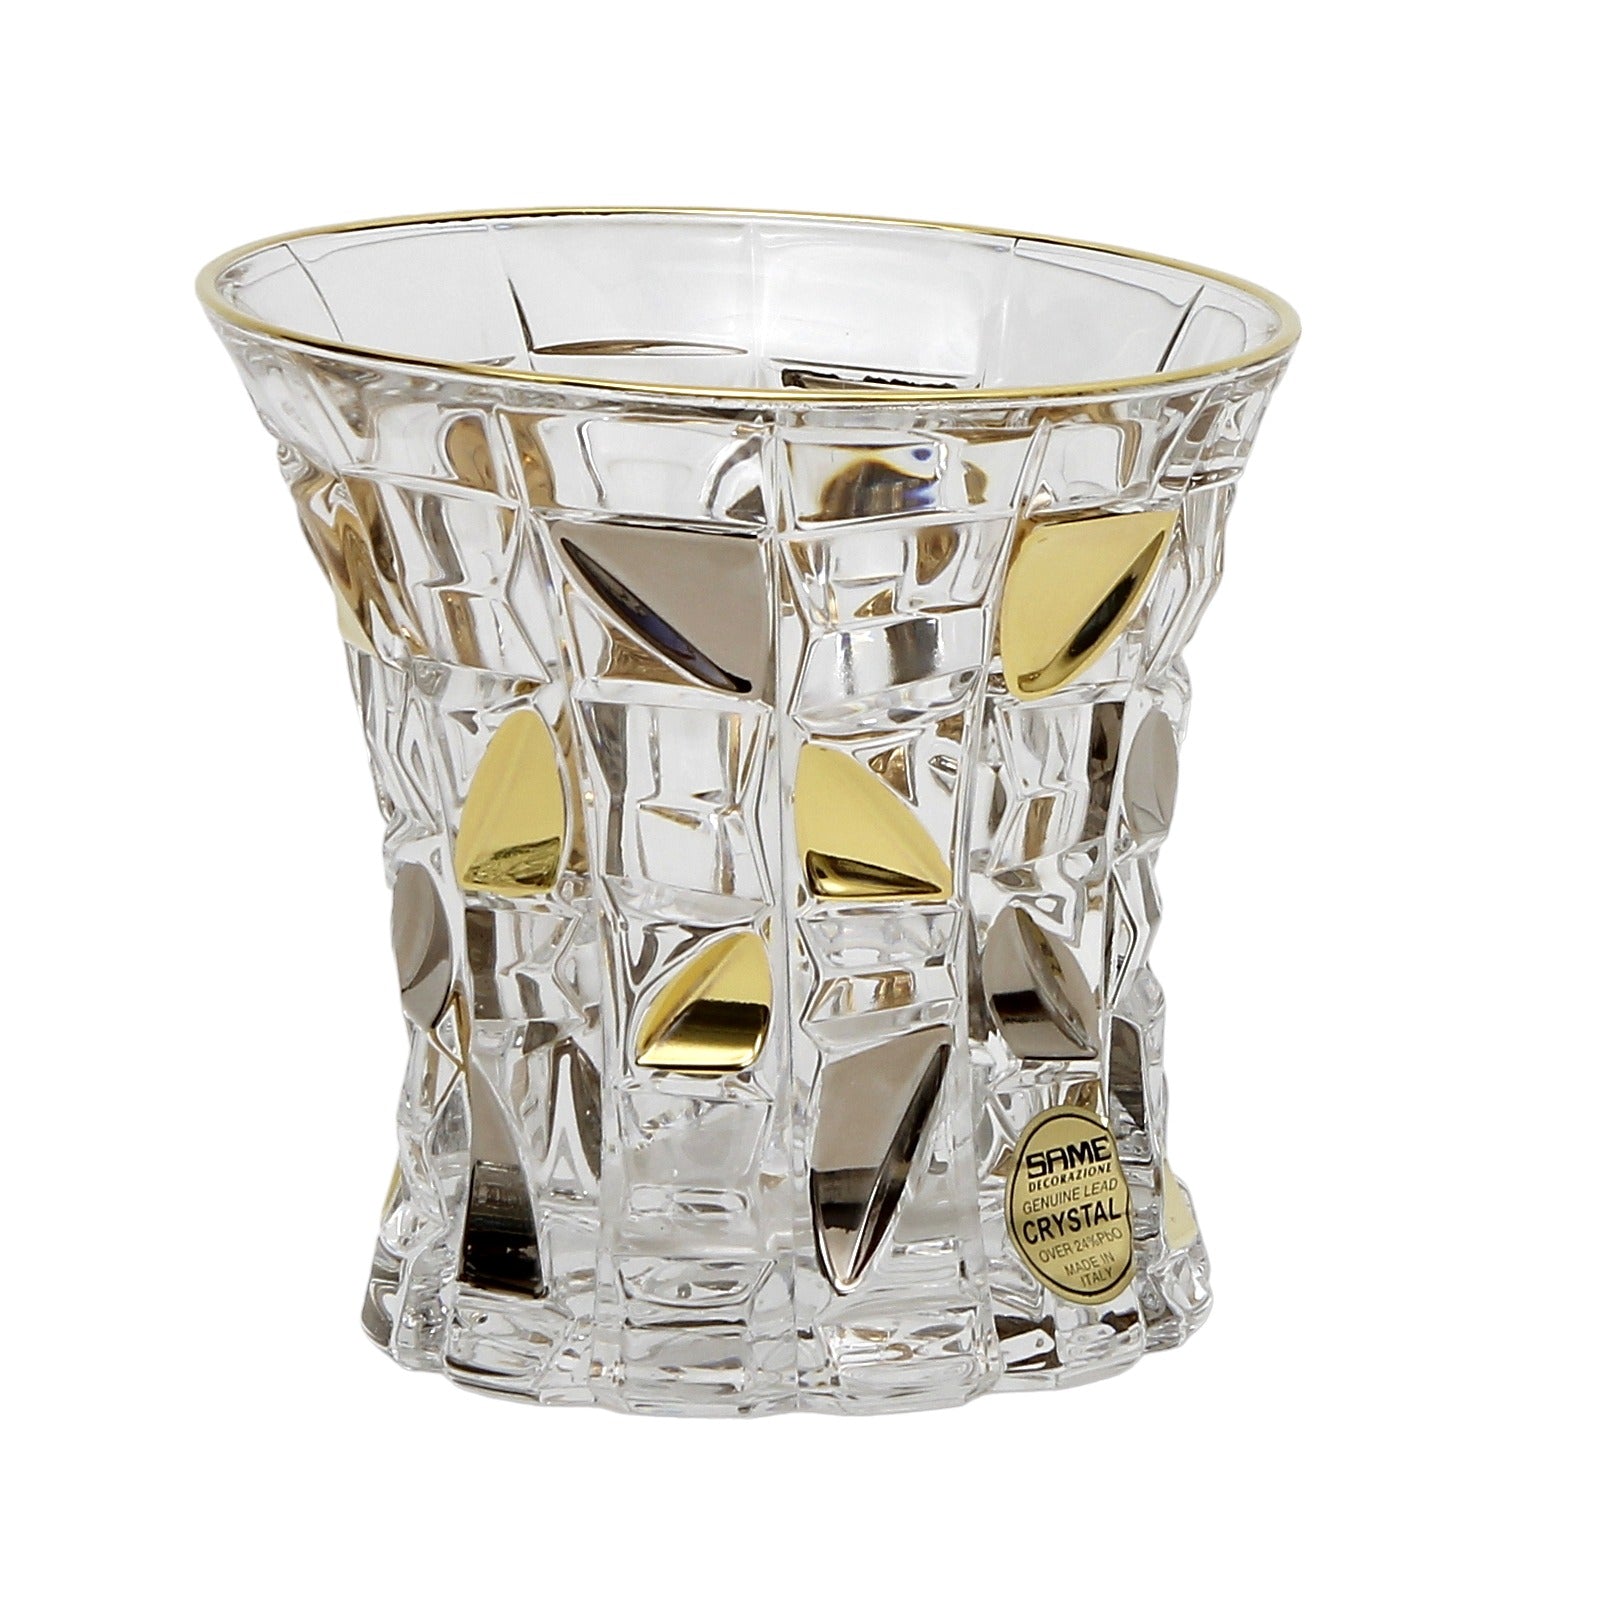 GIFT BOX With two EXQUISITE ITALIAN CRYSTAL FOR WHISKEY/OLD FASHION FEATURING A 24 CARAT GOLD & PLATINUM RIM and ACCENTS